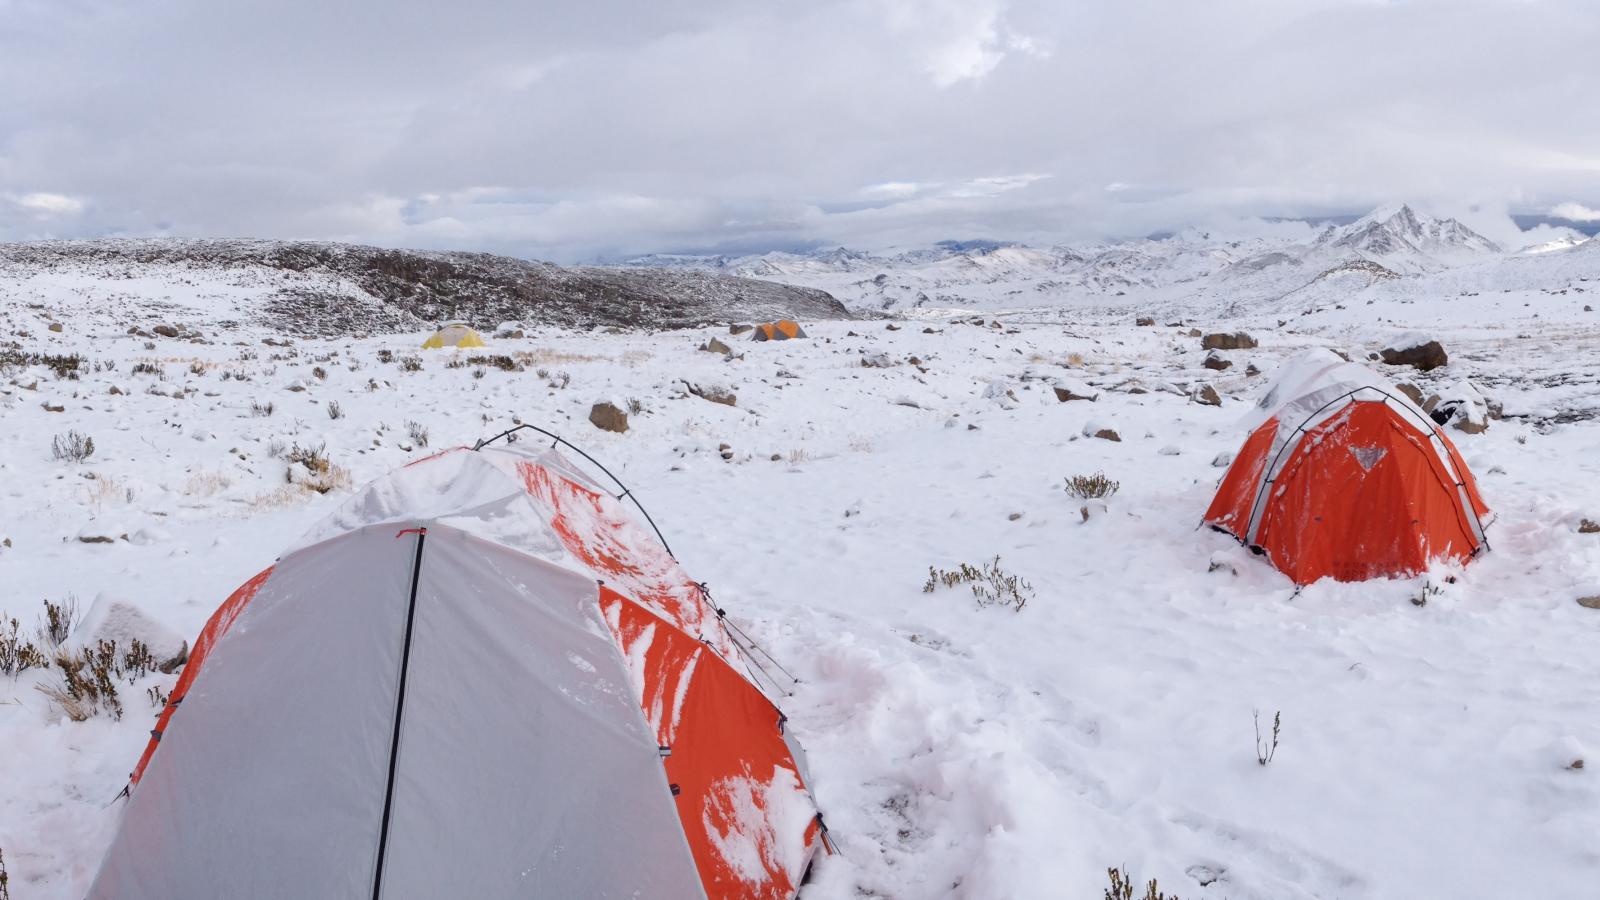 Tents in snow-covered terrain with mountains in background